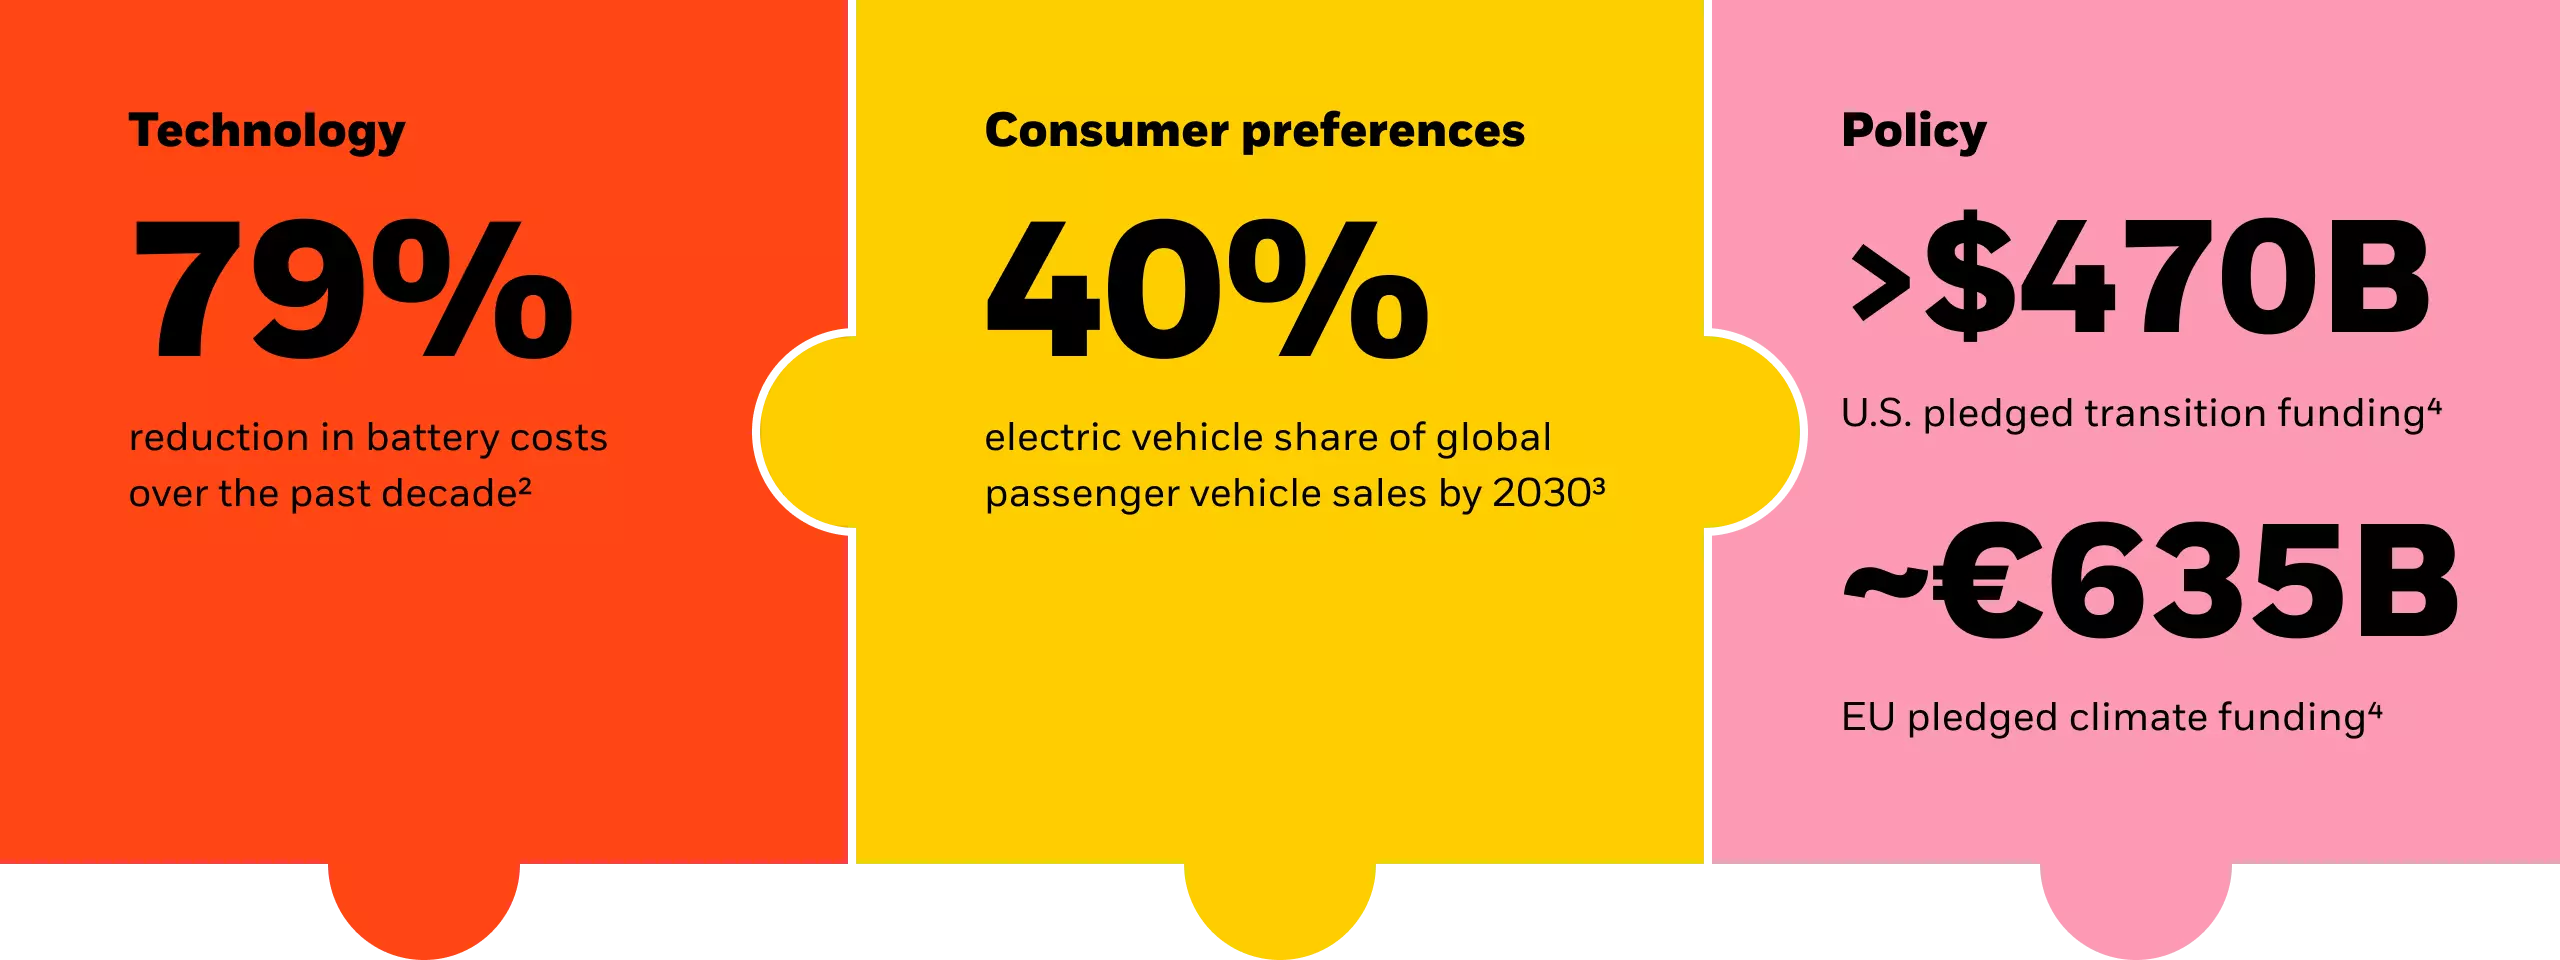 Three forces are driving this economic transformation, with implications across regions and sectors are technology with a 79% reduction in battery costs (source 2), consumer preferences with a 40% electric vehicle share of global passenger vehicle sales by 2030 (source 3), and policy with upwards of